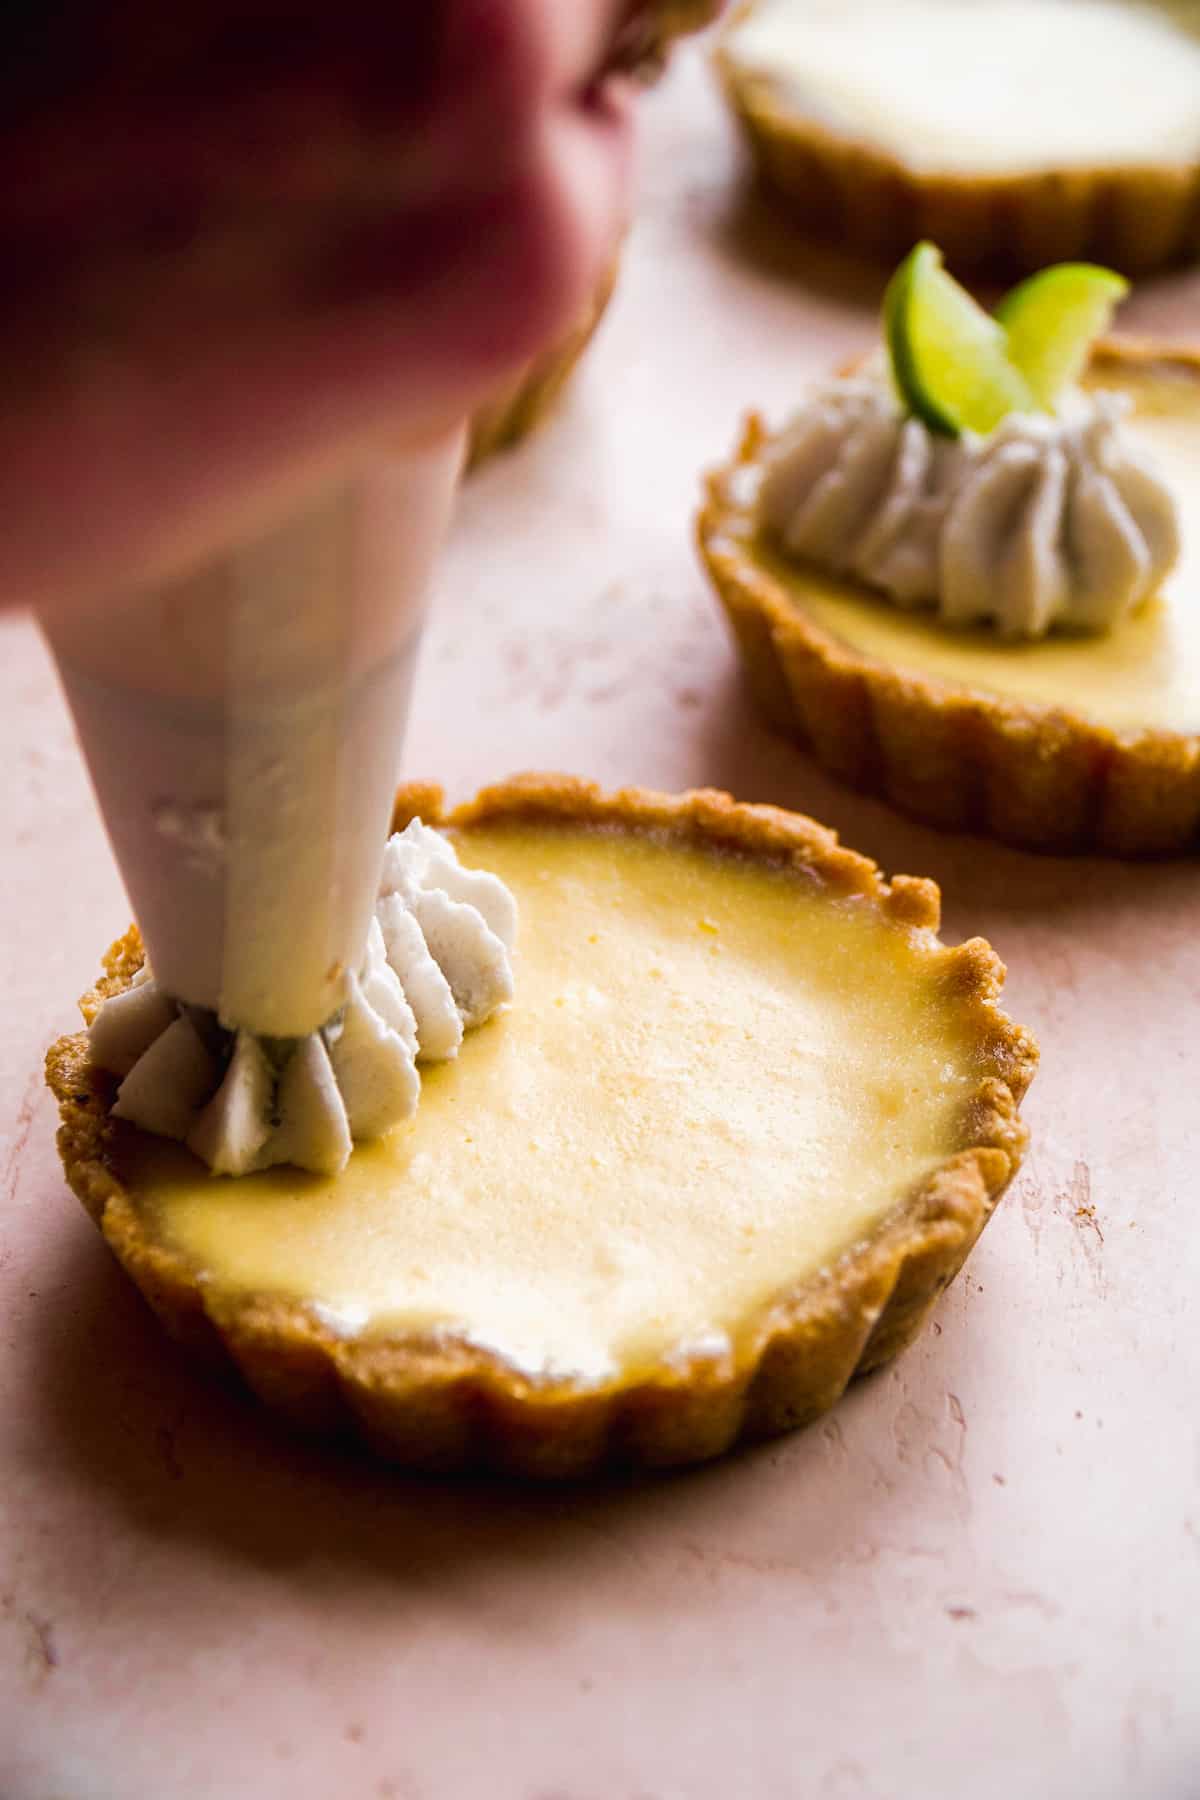 Hand pipping whipped cream onto a gluten free key lime pie.